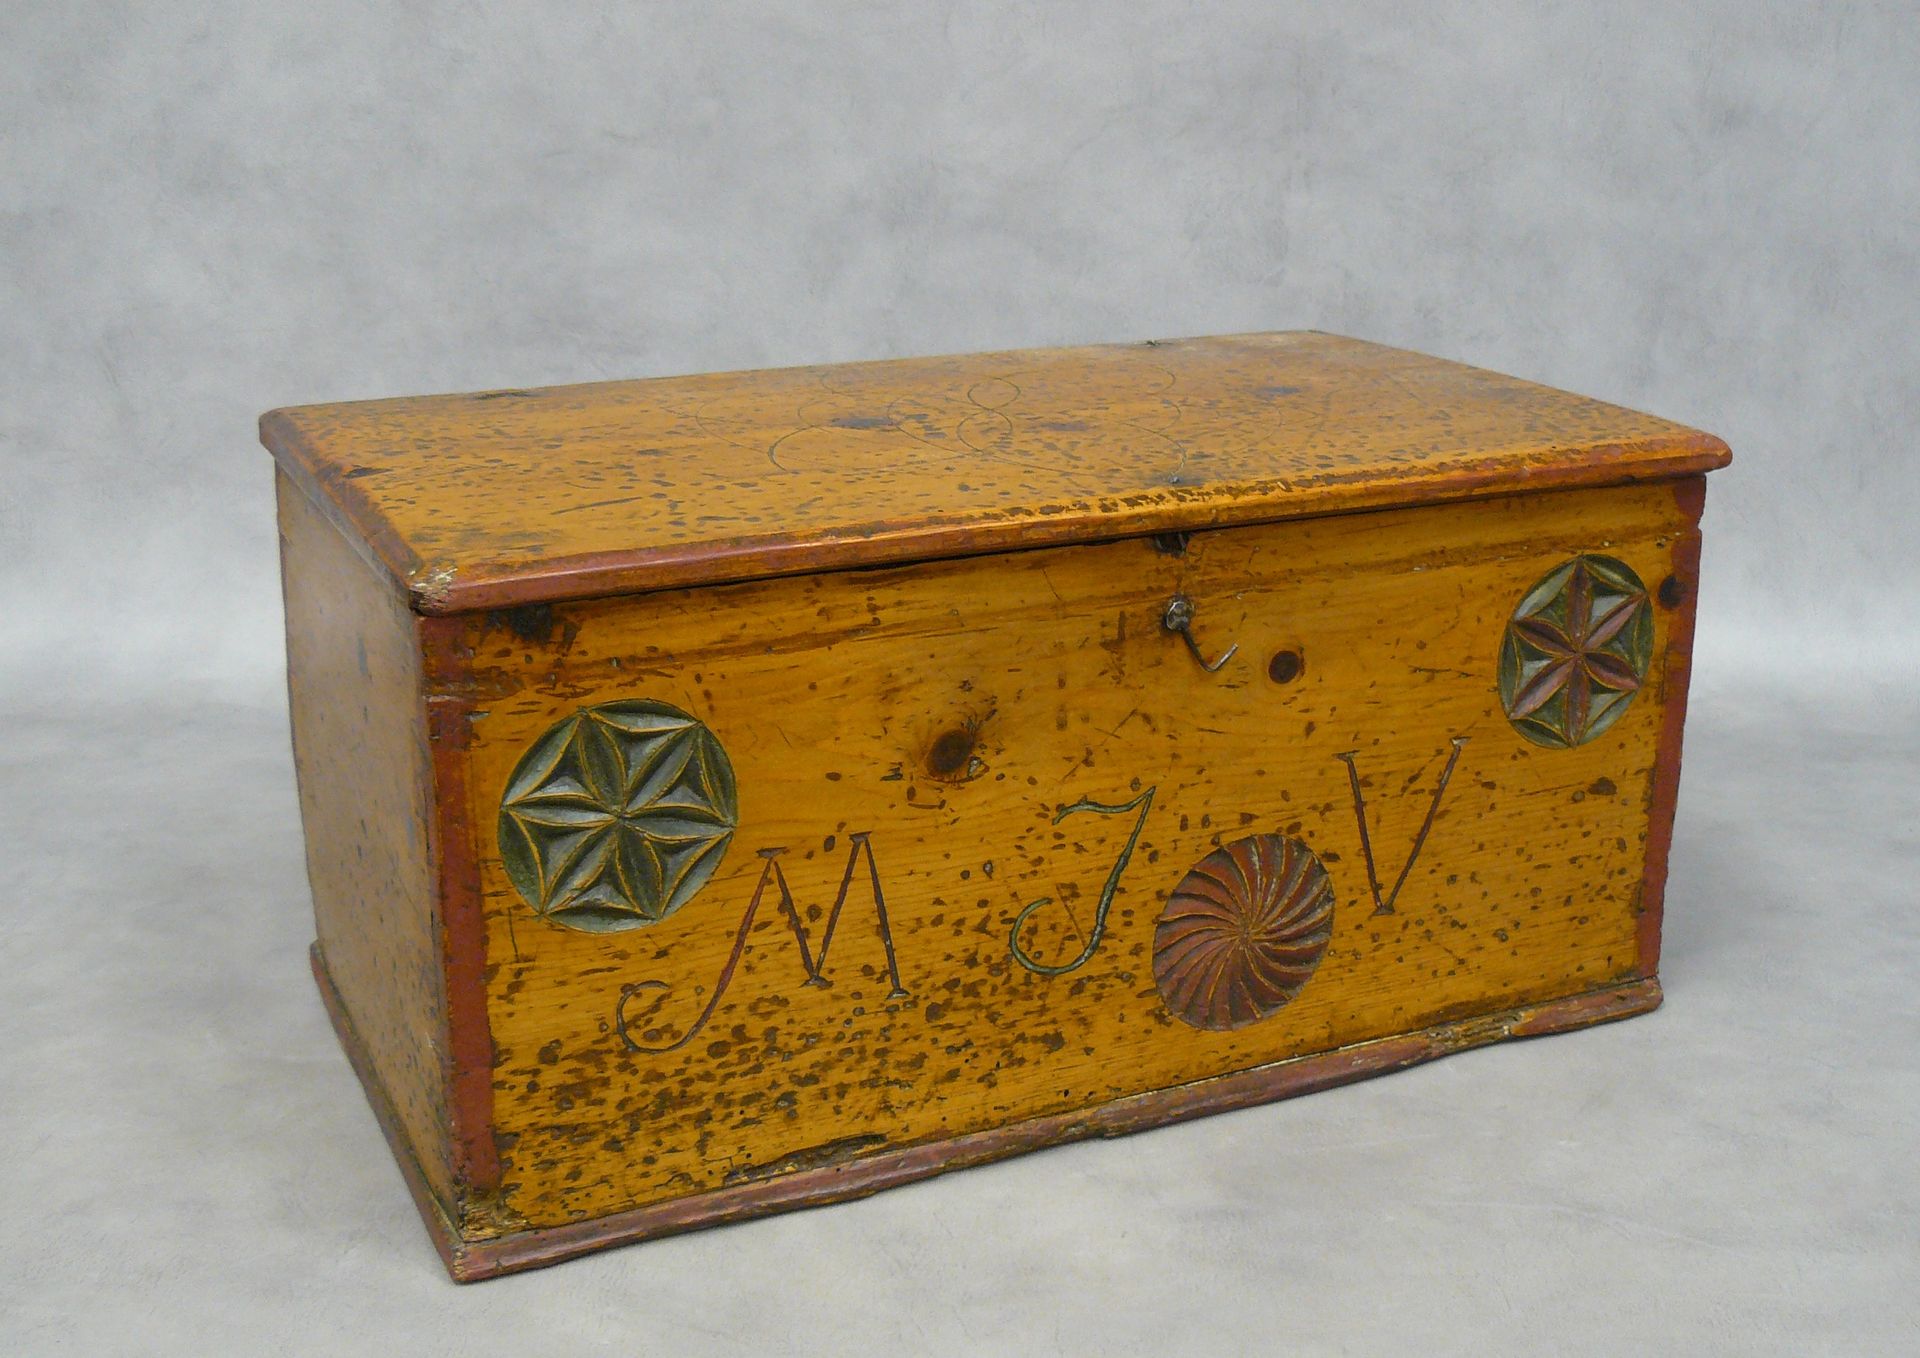 Null a polychrome, engraved and carved wooden box decorated with rosettes and ro&hellip;